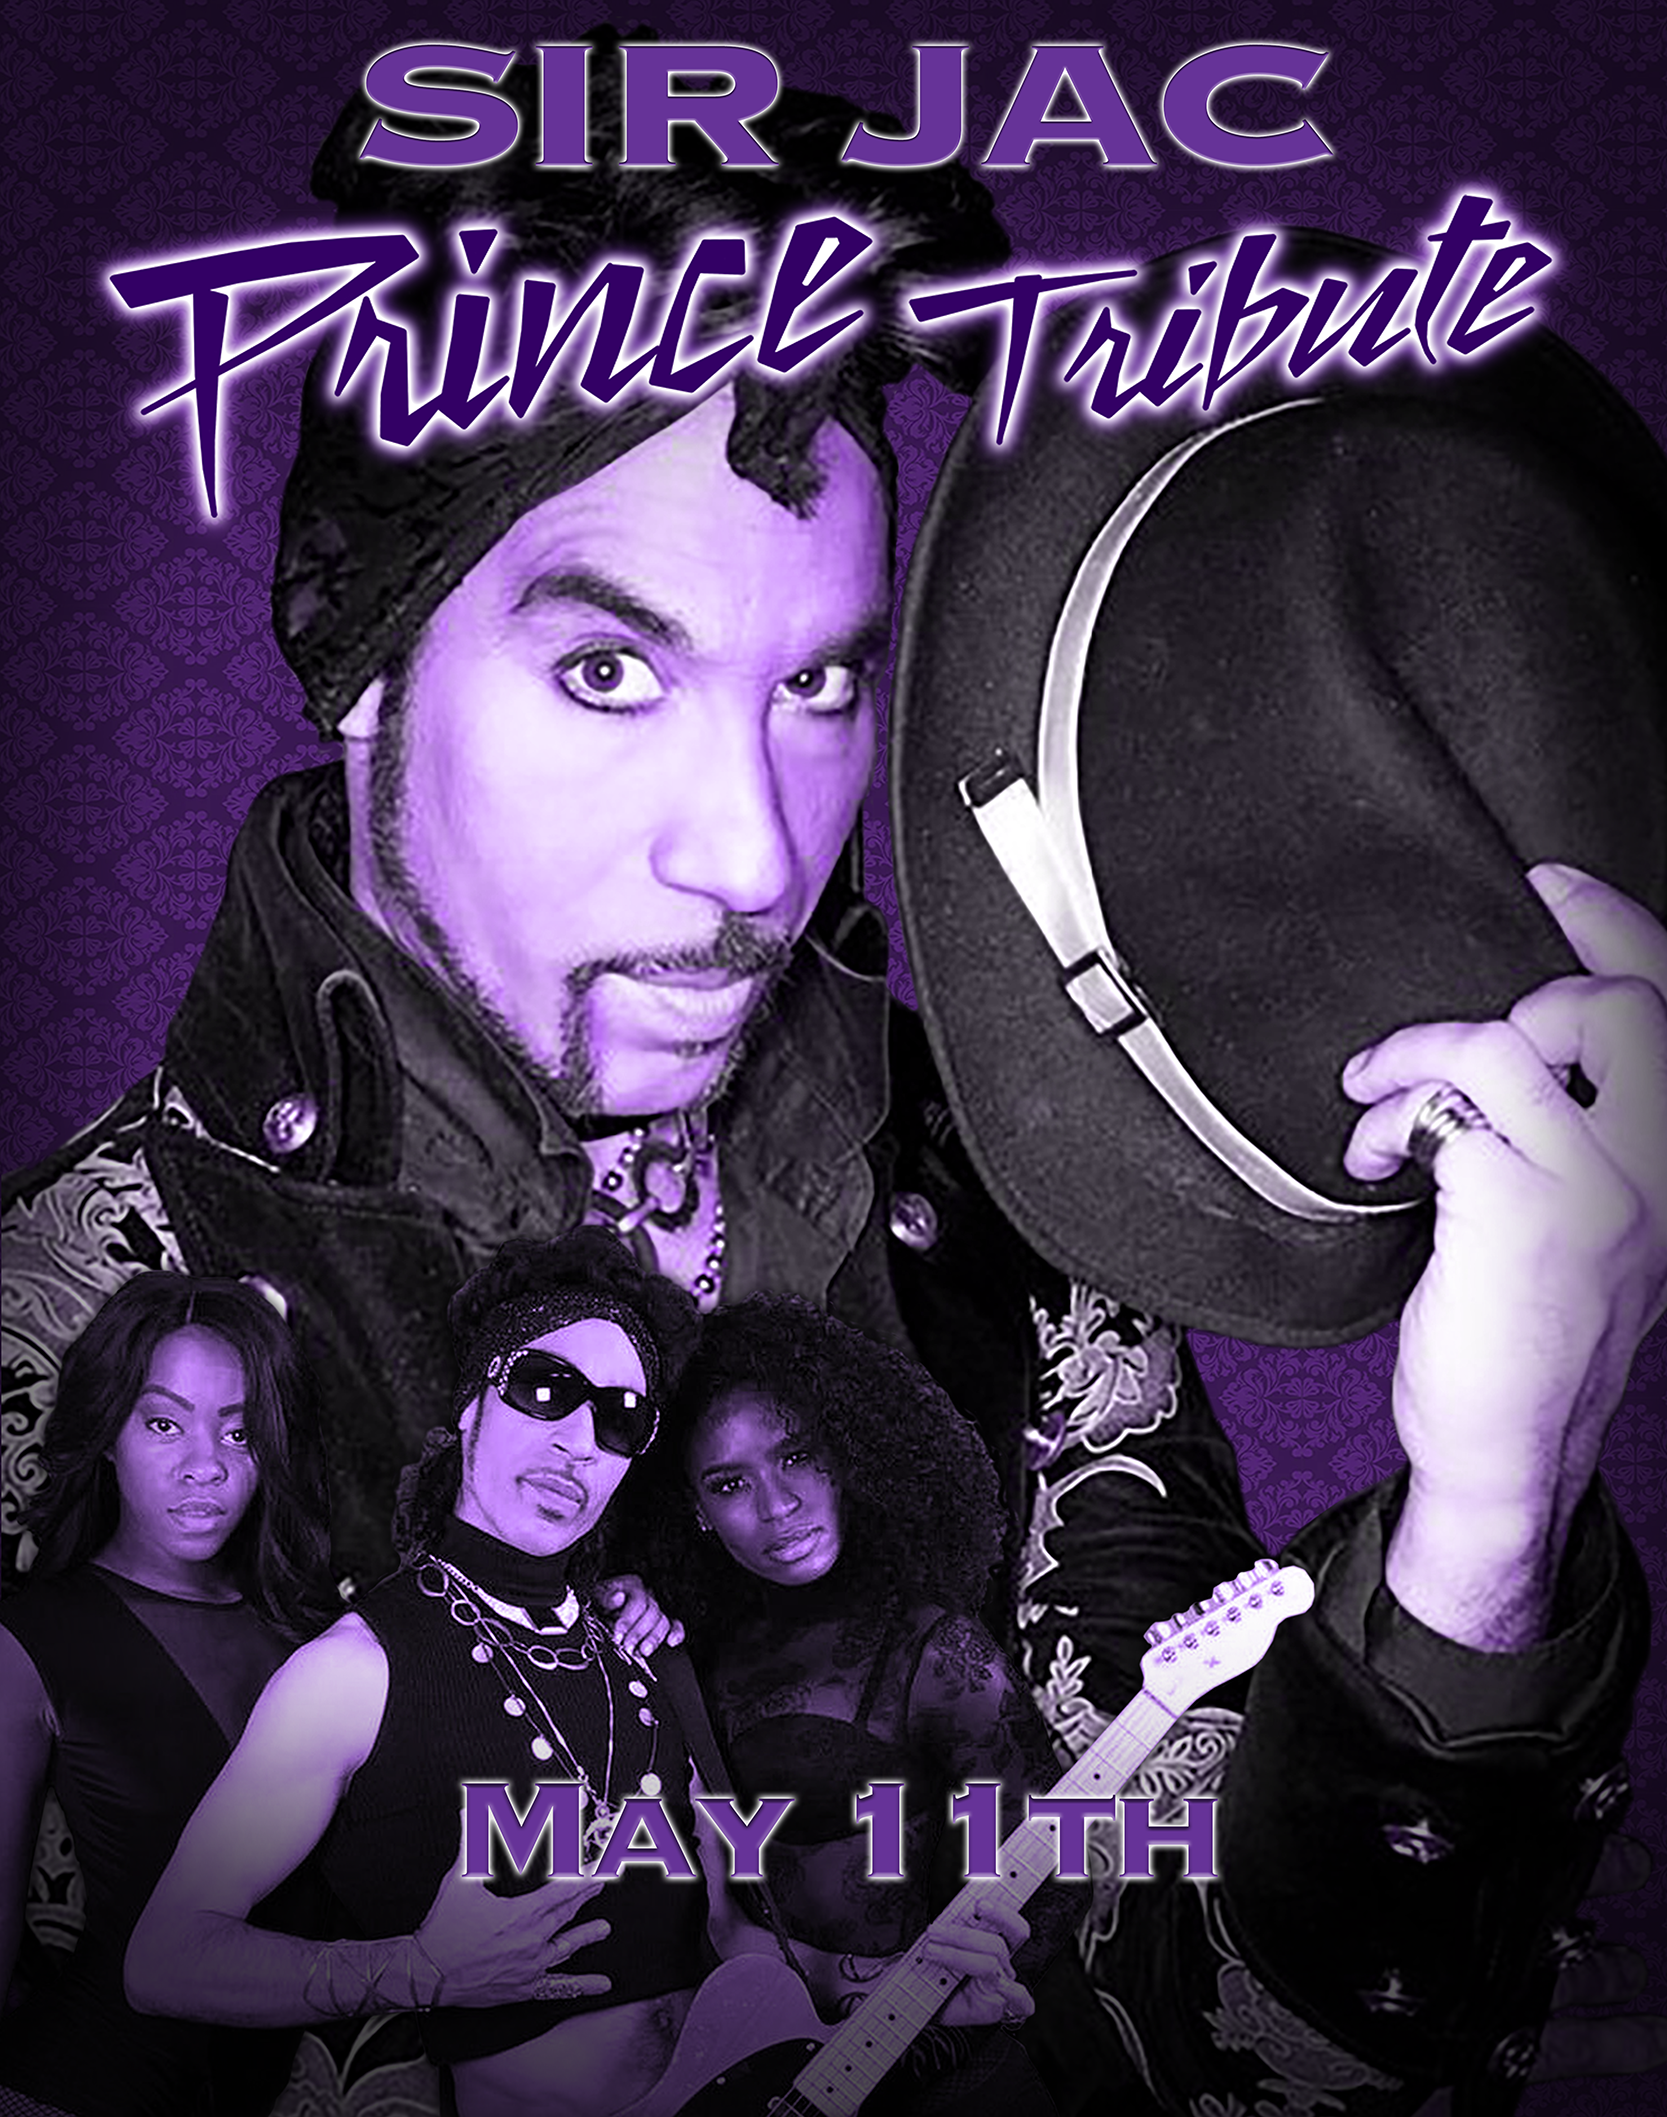 Sir Jax, a tribute to the music of Prince on May 11th